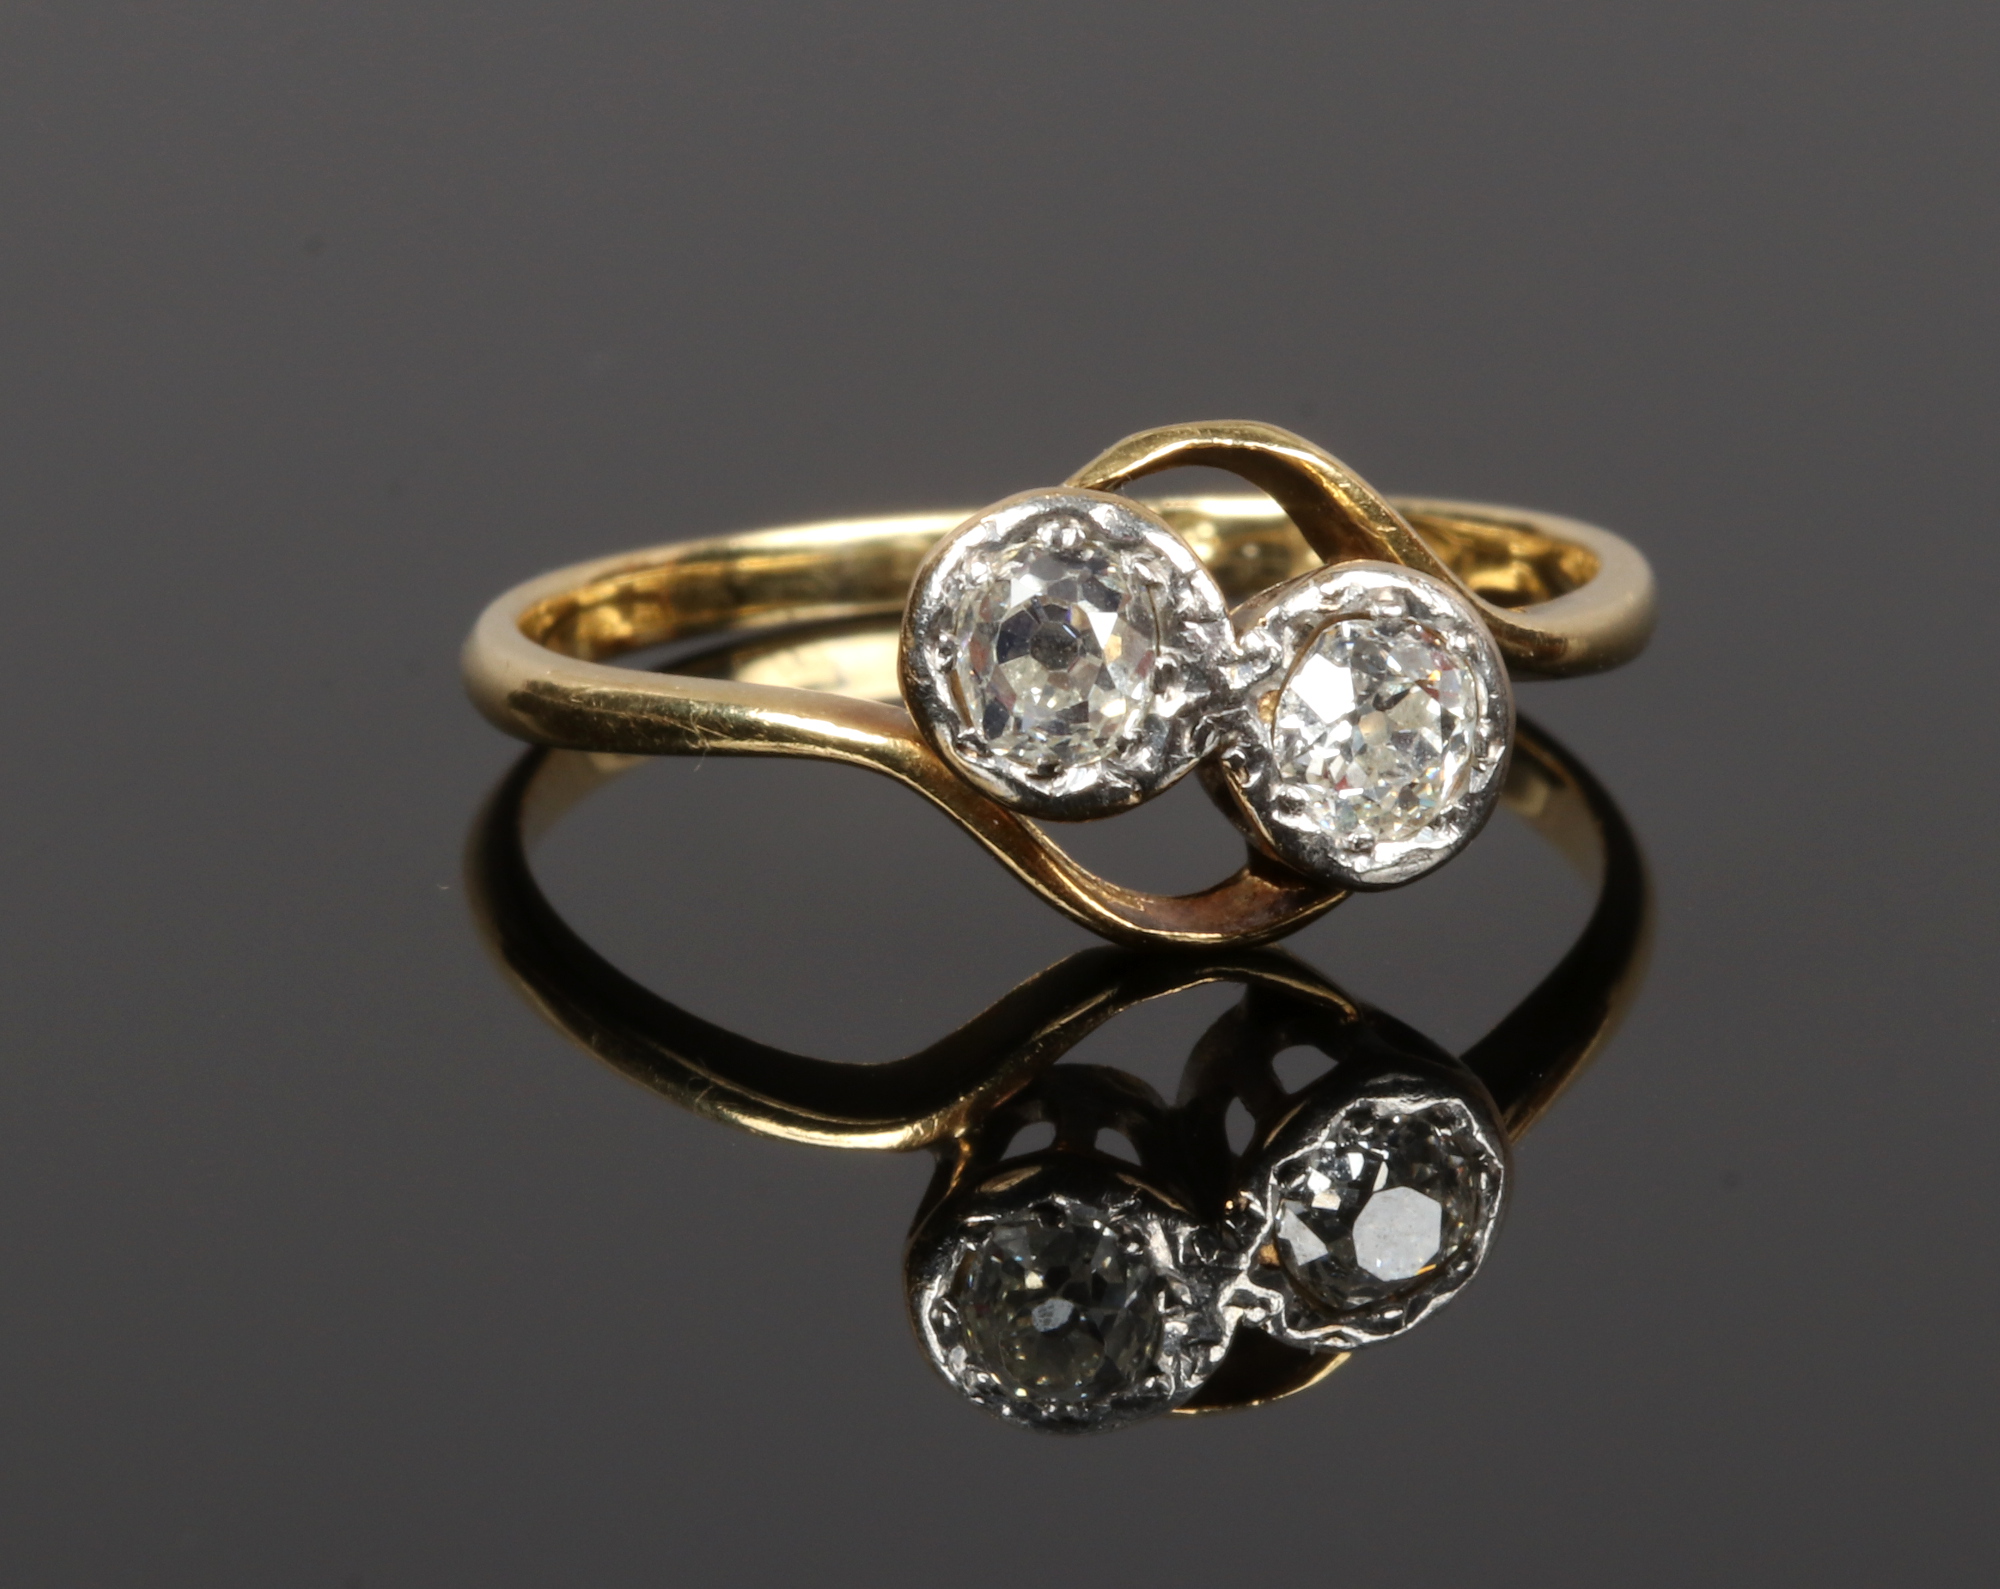 An 18ct gold and diamond two stone cross over ring, set with old European cut stones, stones